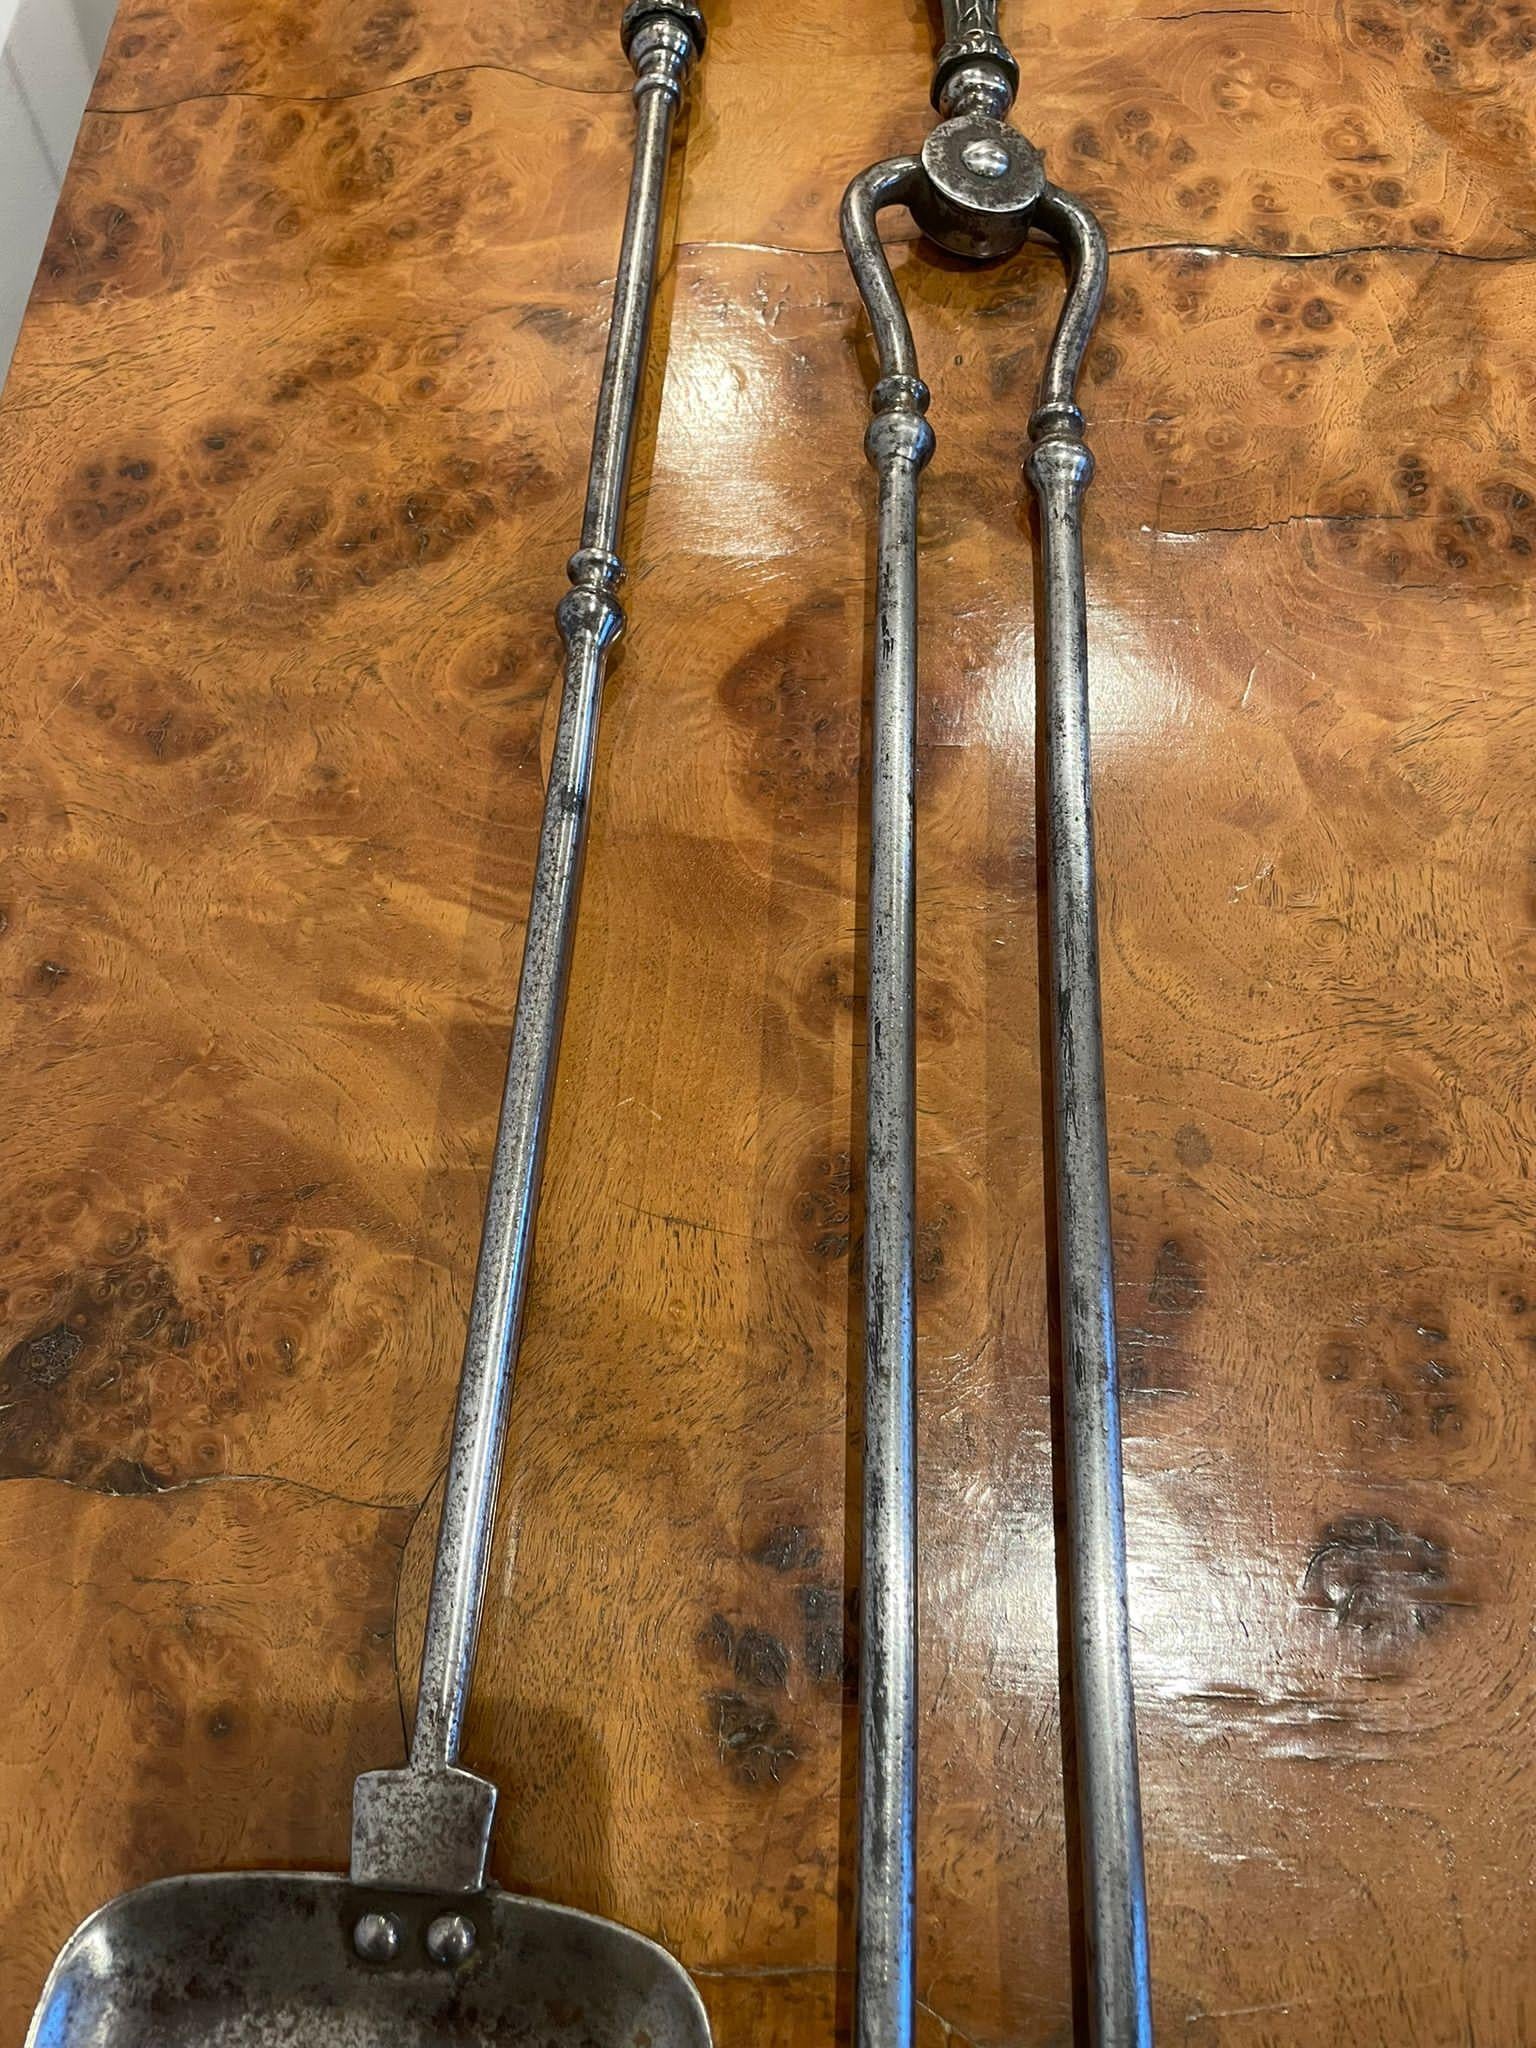 Pair of George III antique steel fire irons consisting of a pair of steel fire tongs and a shovel with a pieced centre.

Measures: 73.5 x 12 x 3cm 

Date 1780.
 